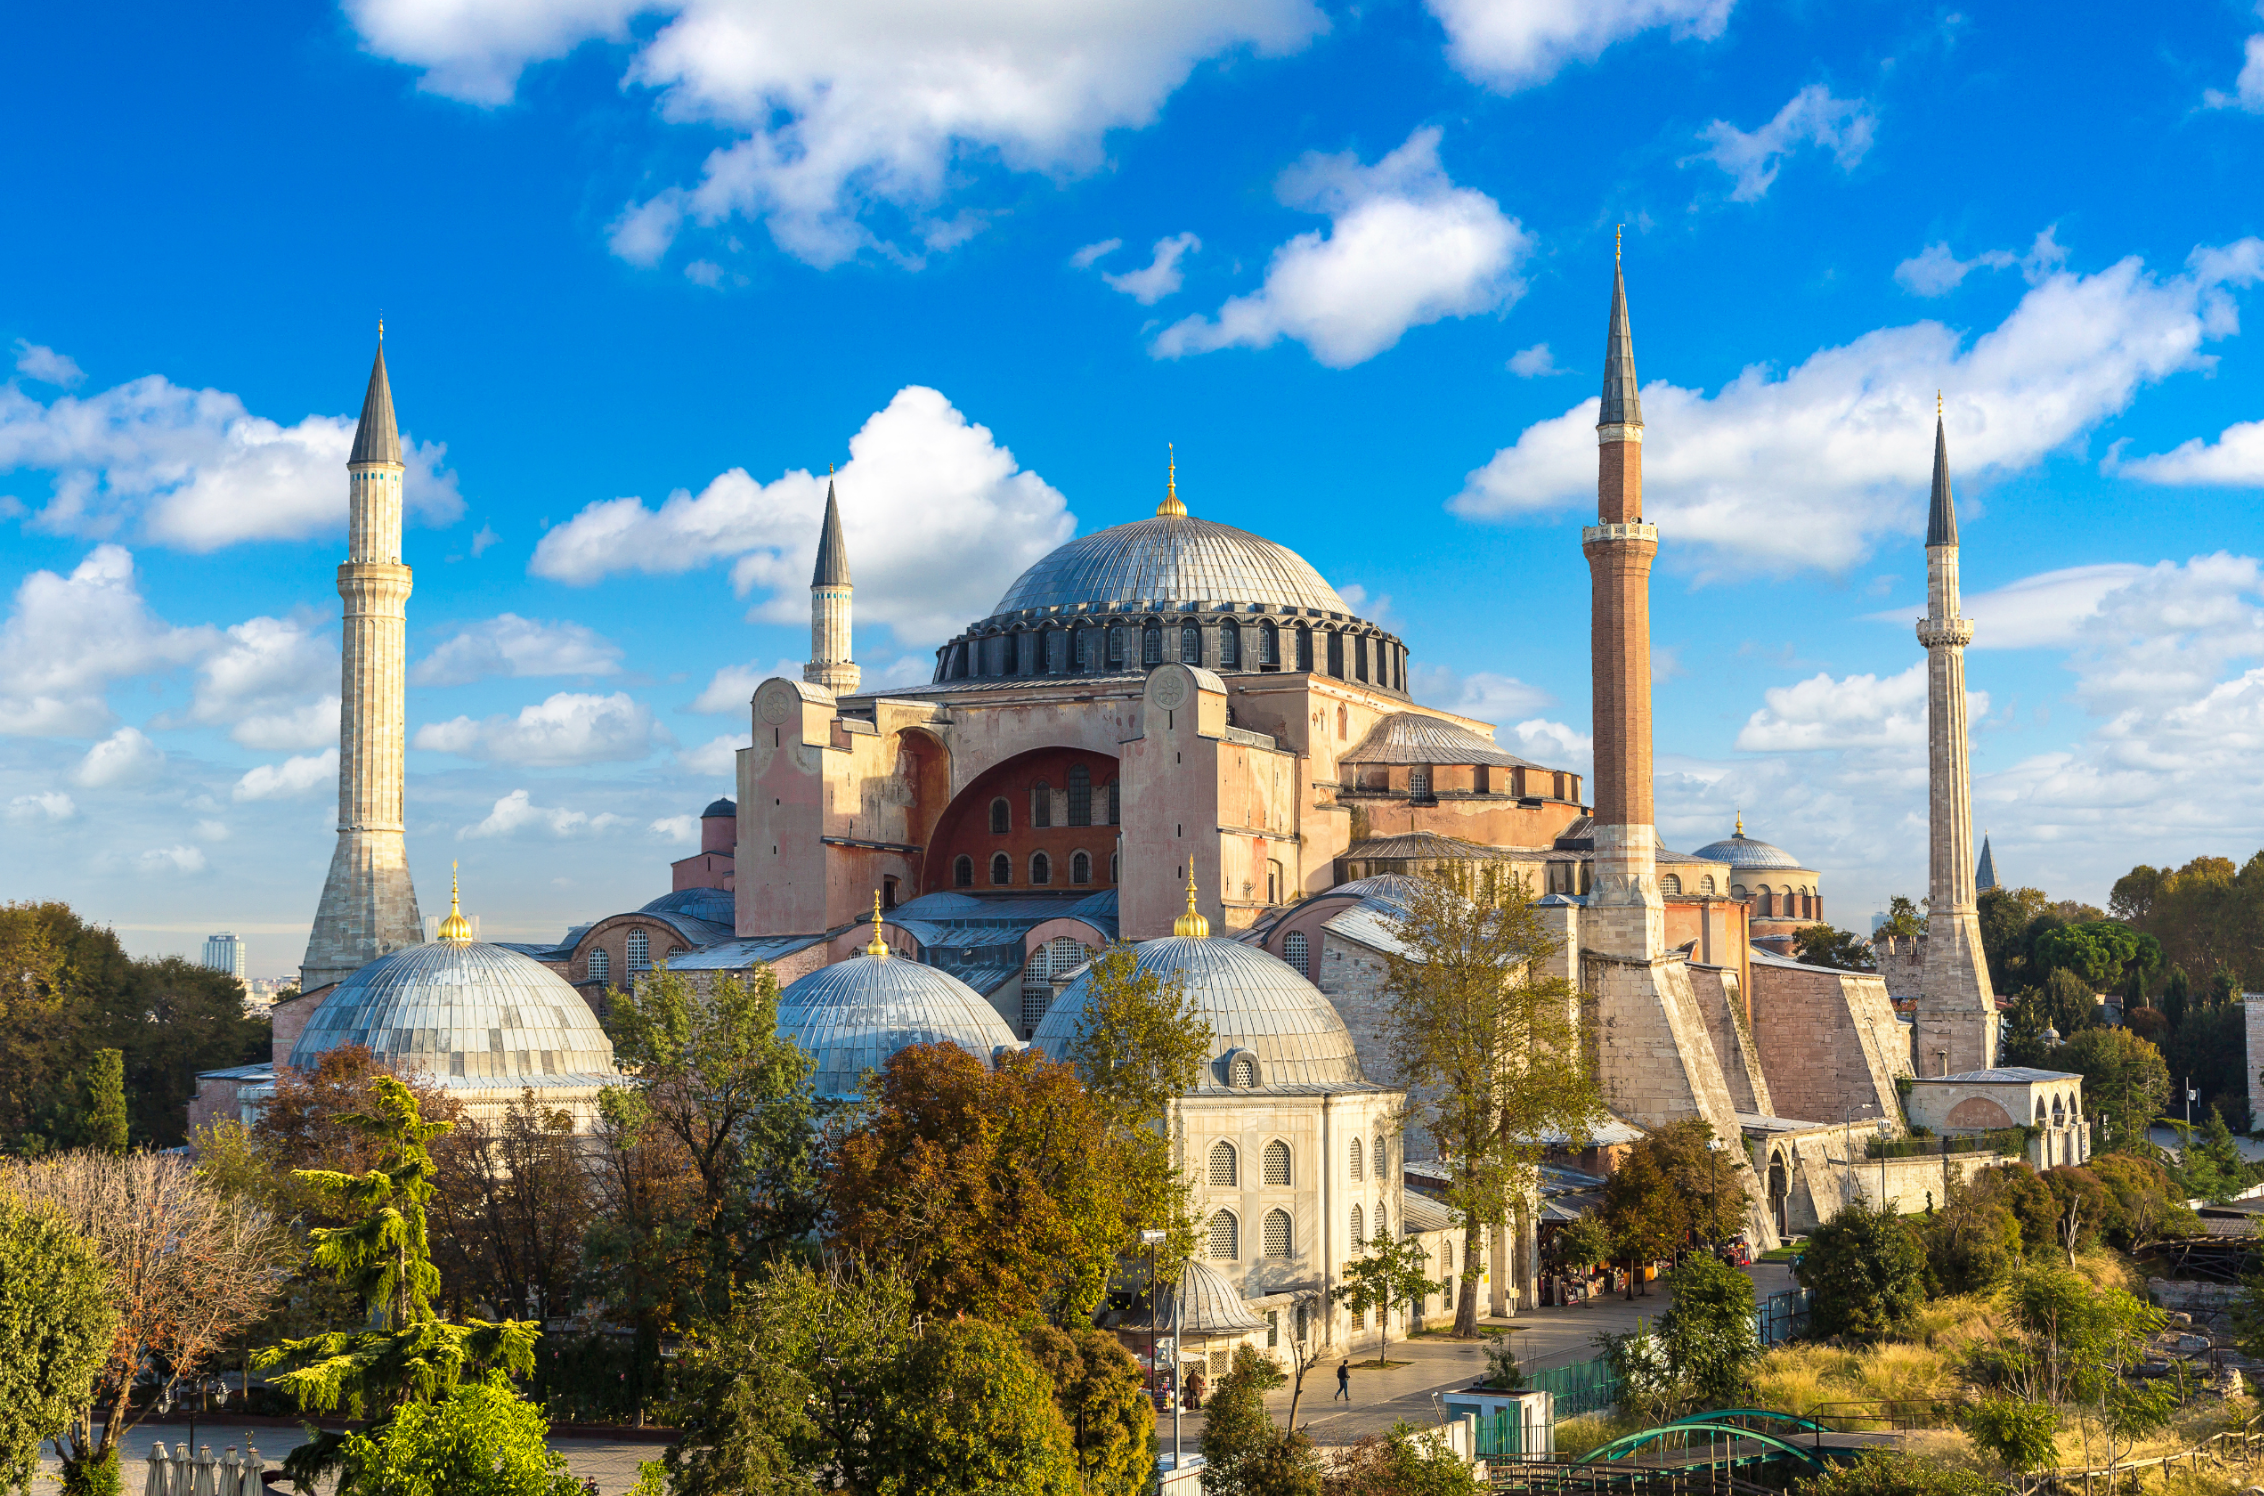 Citizens’ enquiries on the conversion of the Hagia Sophia in Istanbul into a mosque